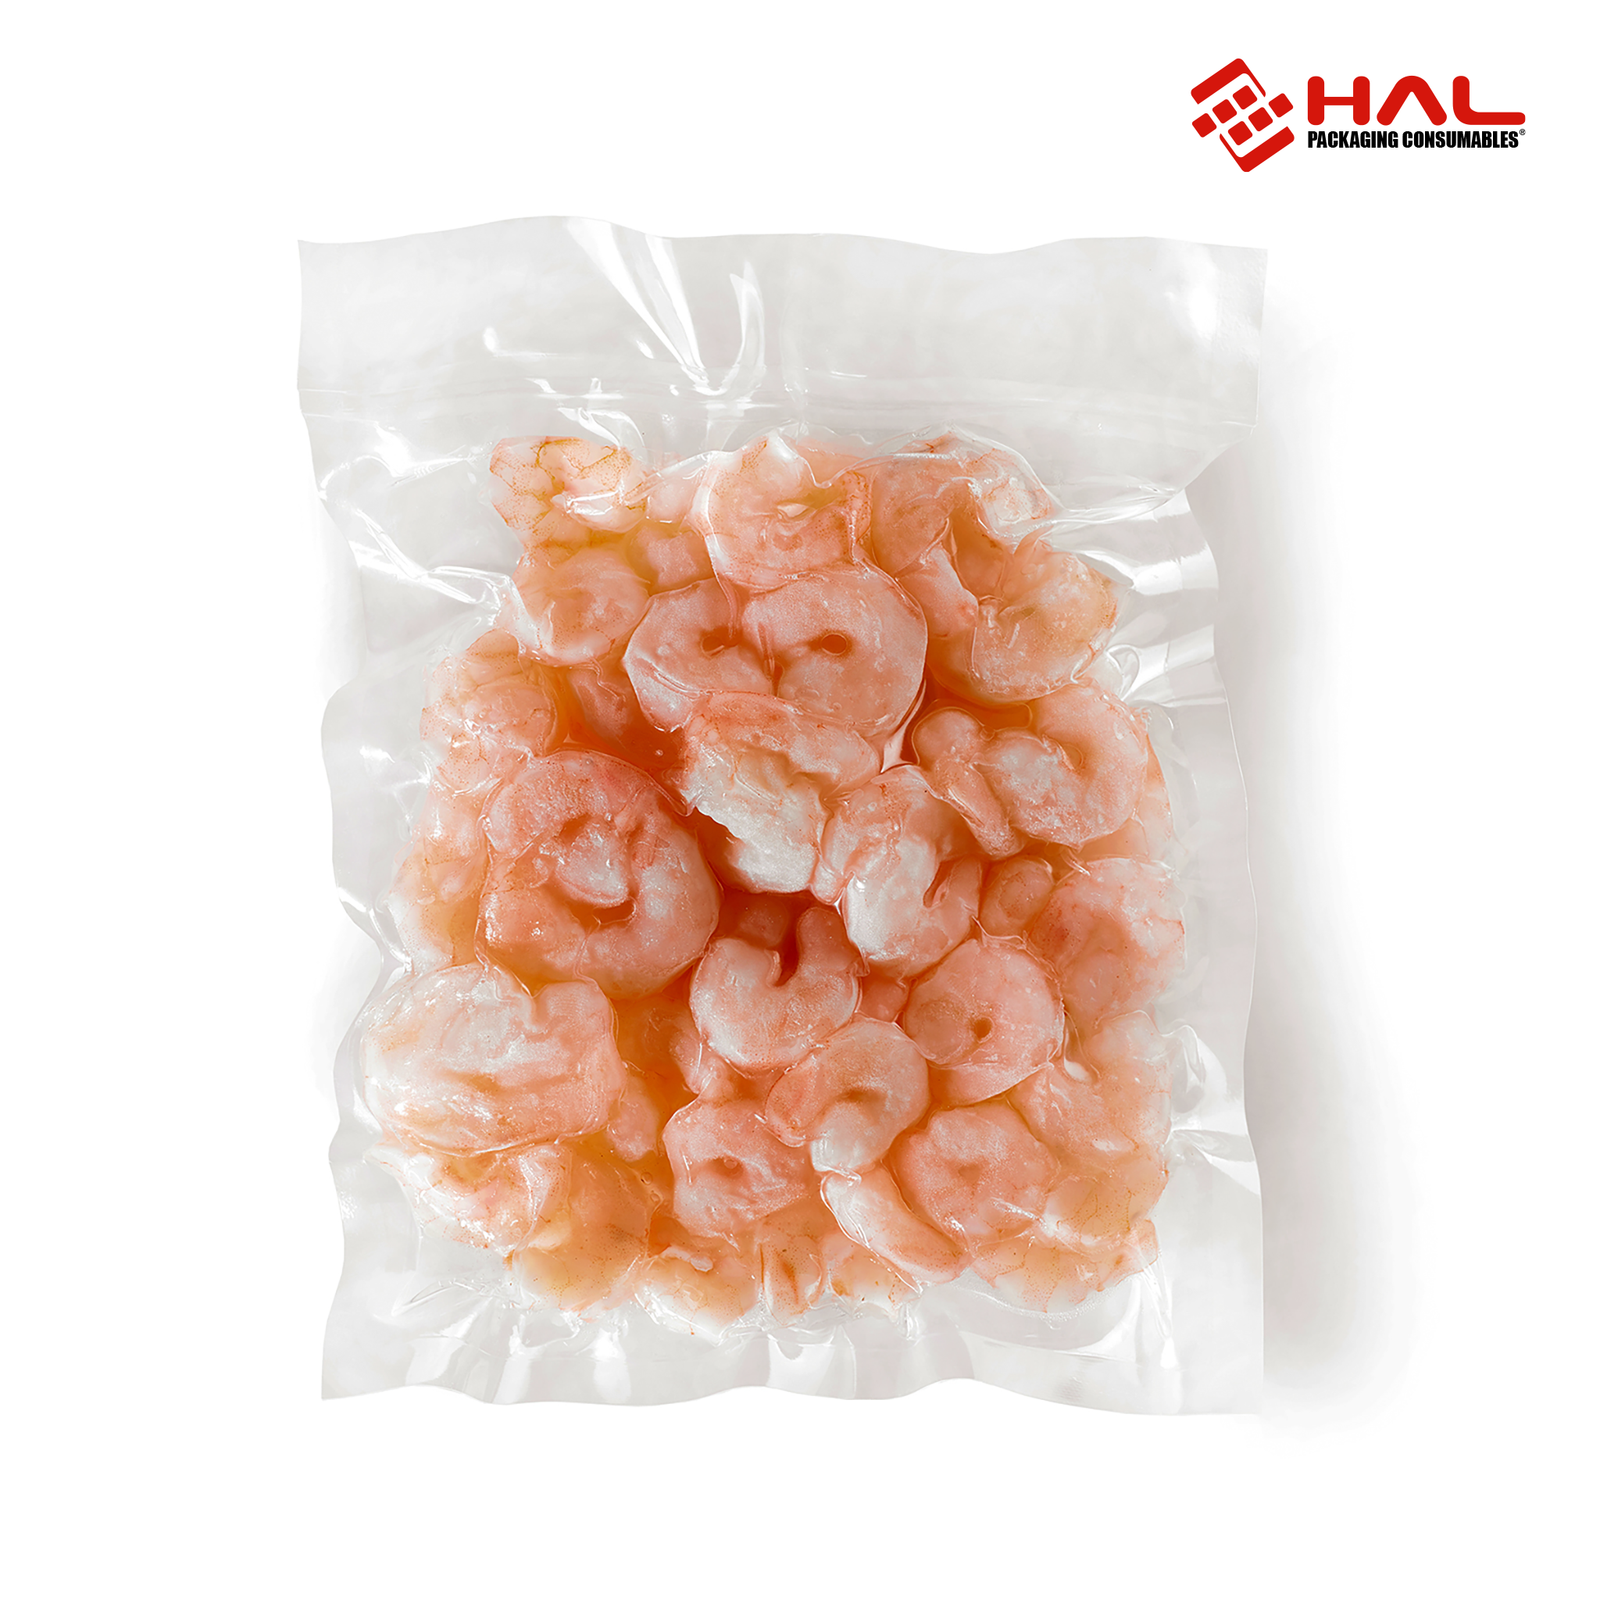 A bunch of raw shrimps pealed and vacuumed sealed in a HAL vacuum sealer bag over white background